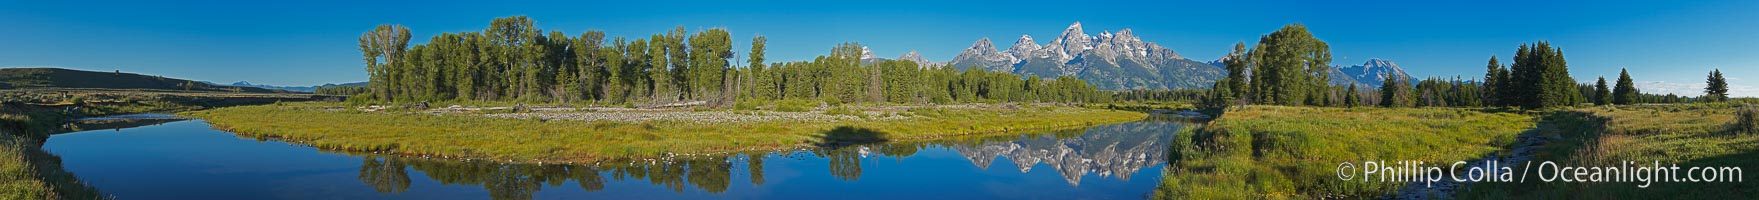 Panorama of the Teton Range reflected in the still waters of Schwabacher Landing, a sidewater of the Snake River, Grand Teton National Park, Wyoming